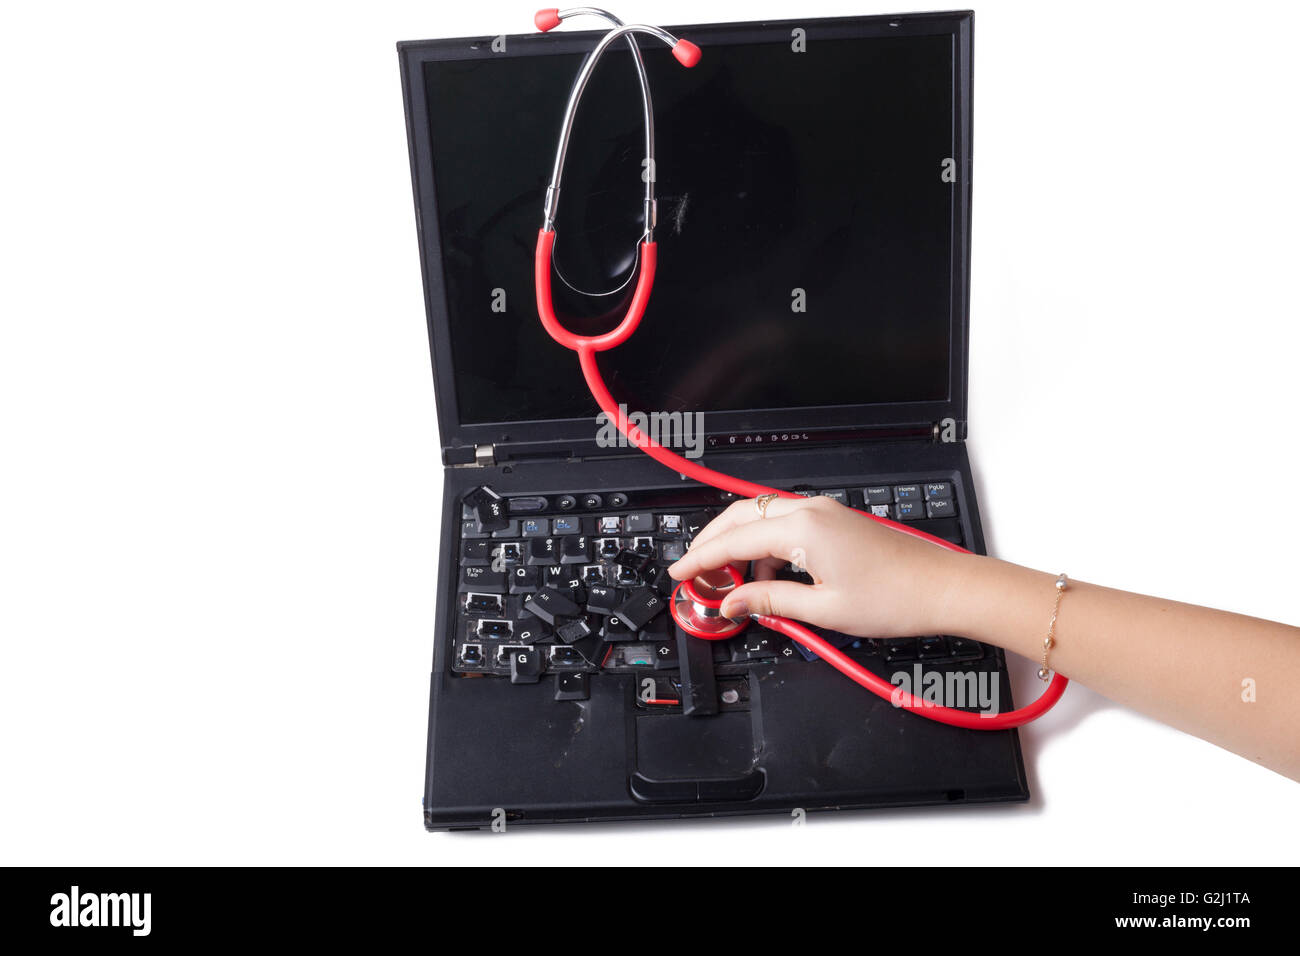 hand holding red stethoscope on broken laptop keyboard solated on white Stock Photo